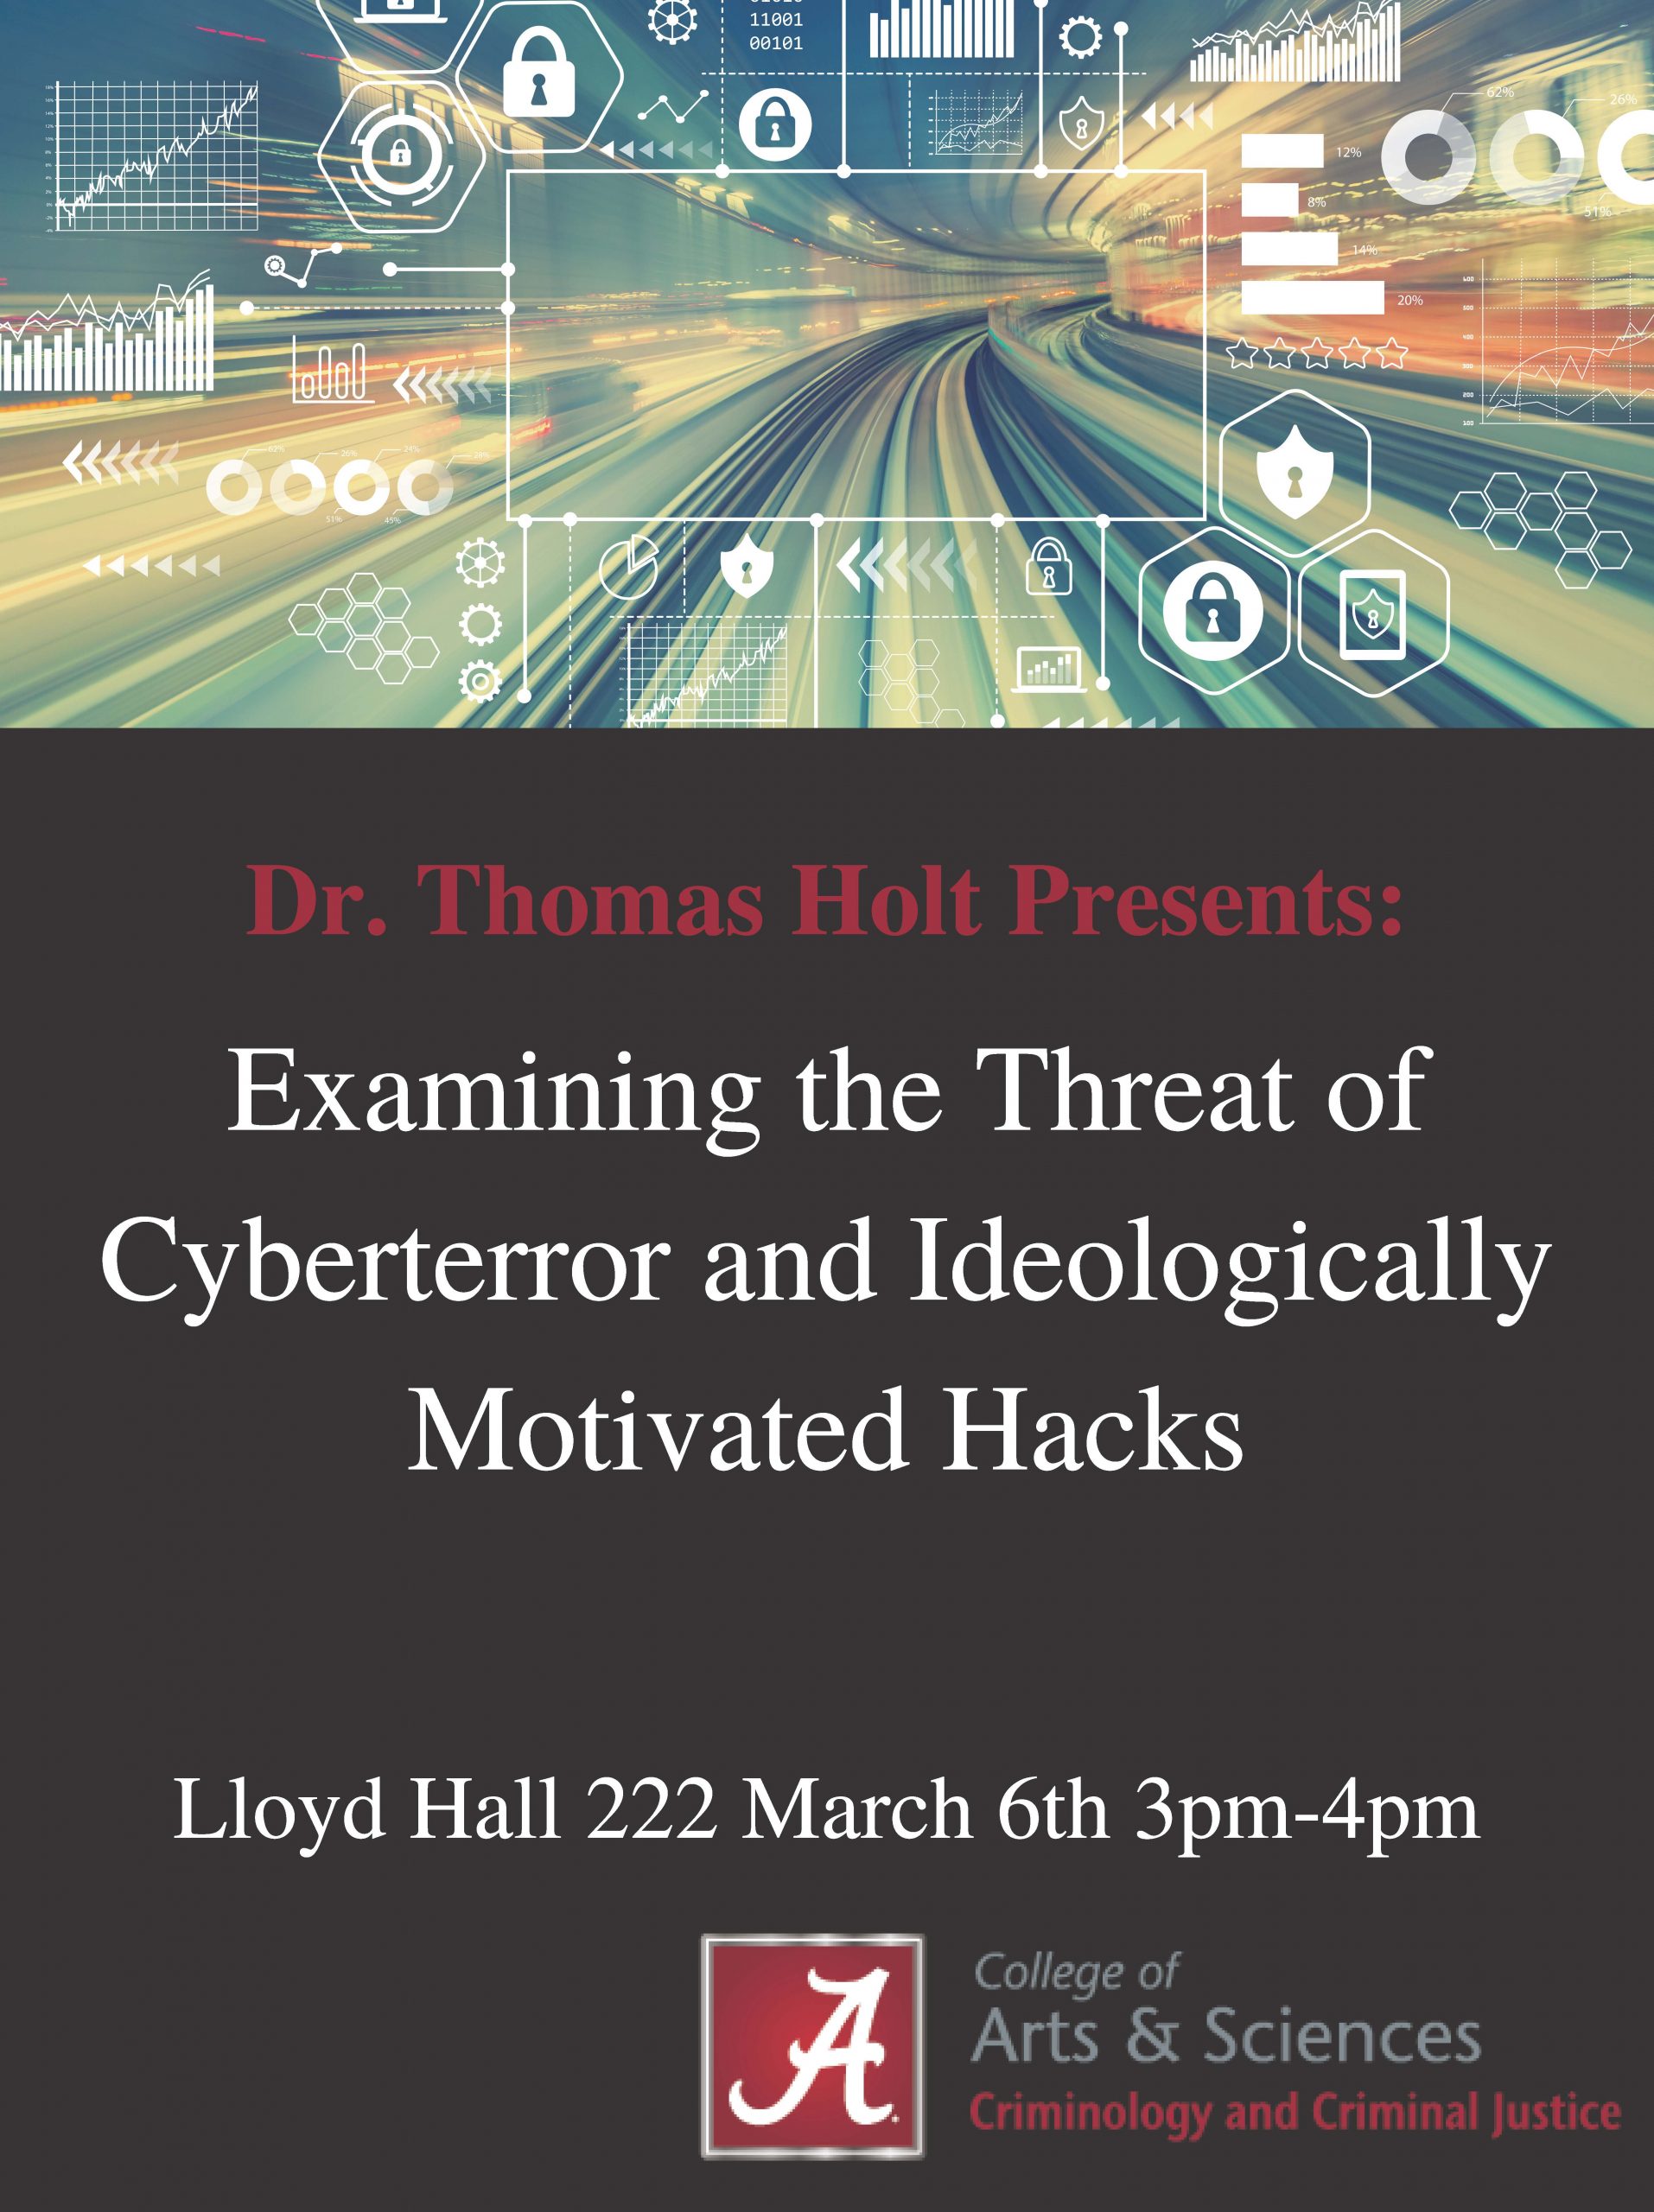 flyer for Dr. Thomas Holt lecture